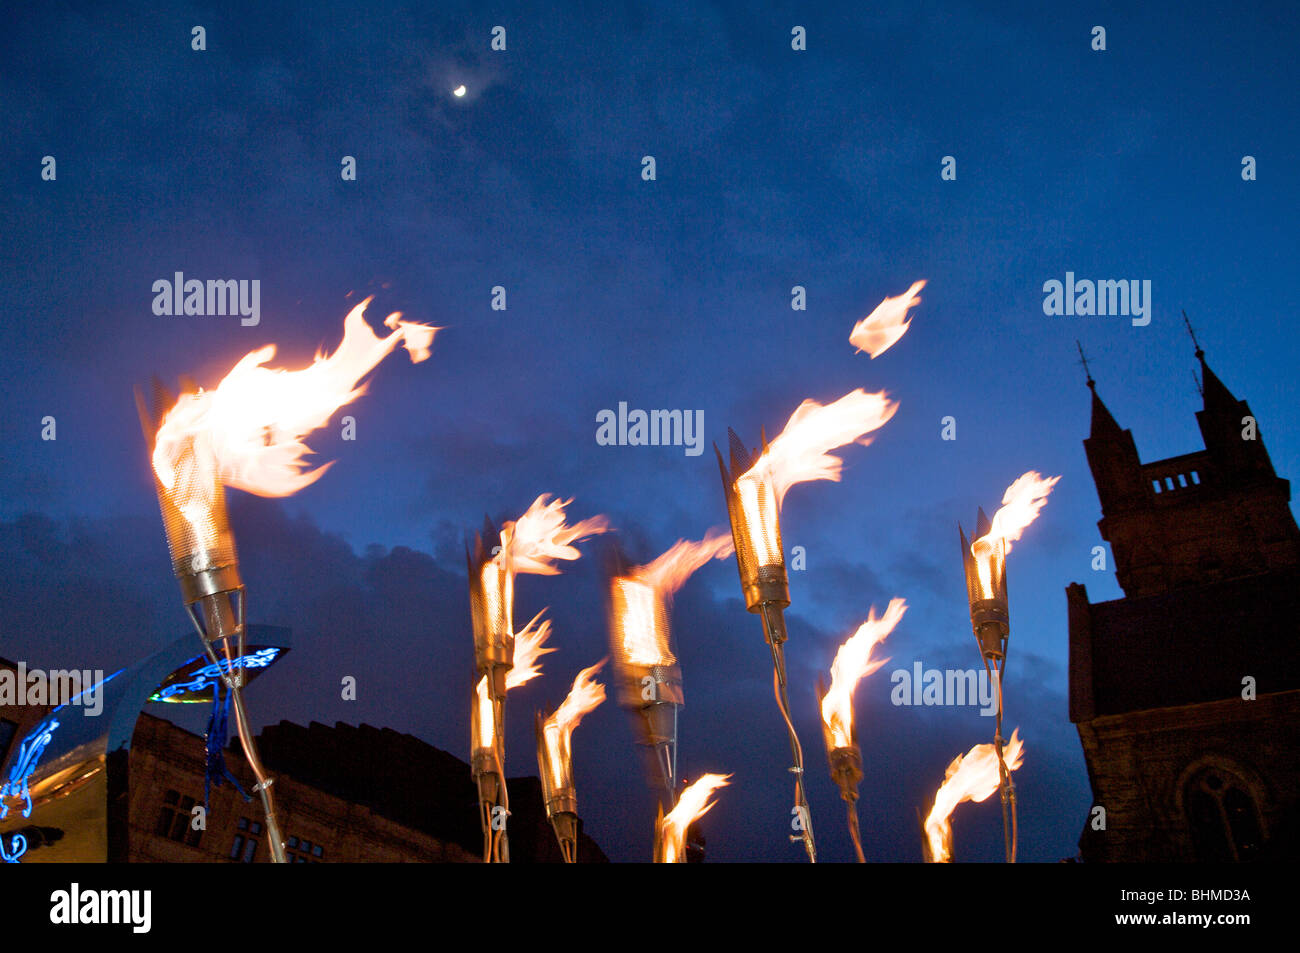 Burning torches against night sky Stock Photo